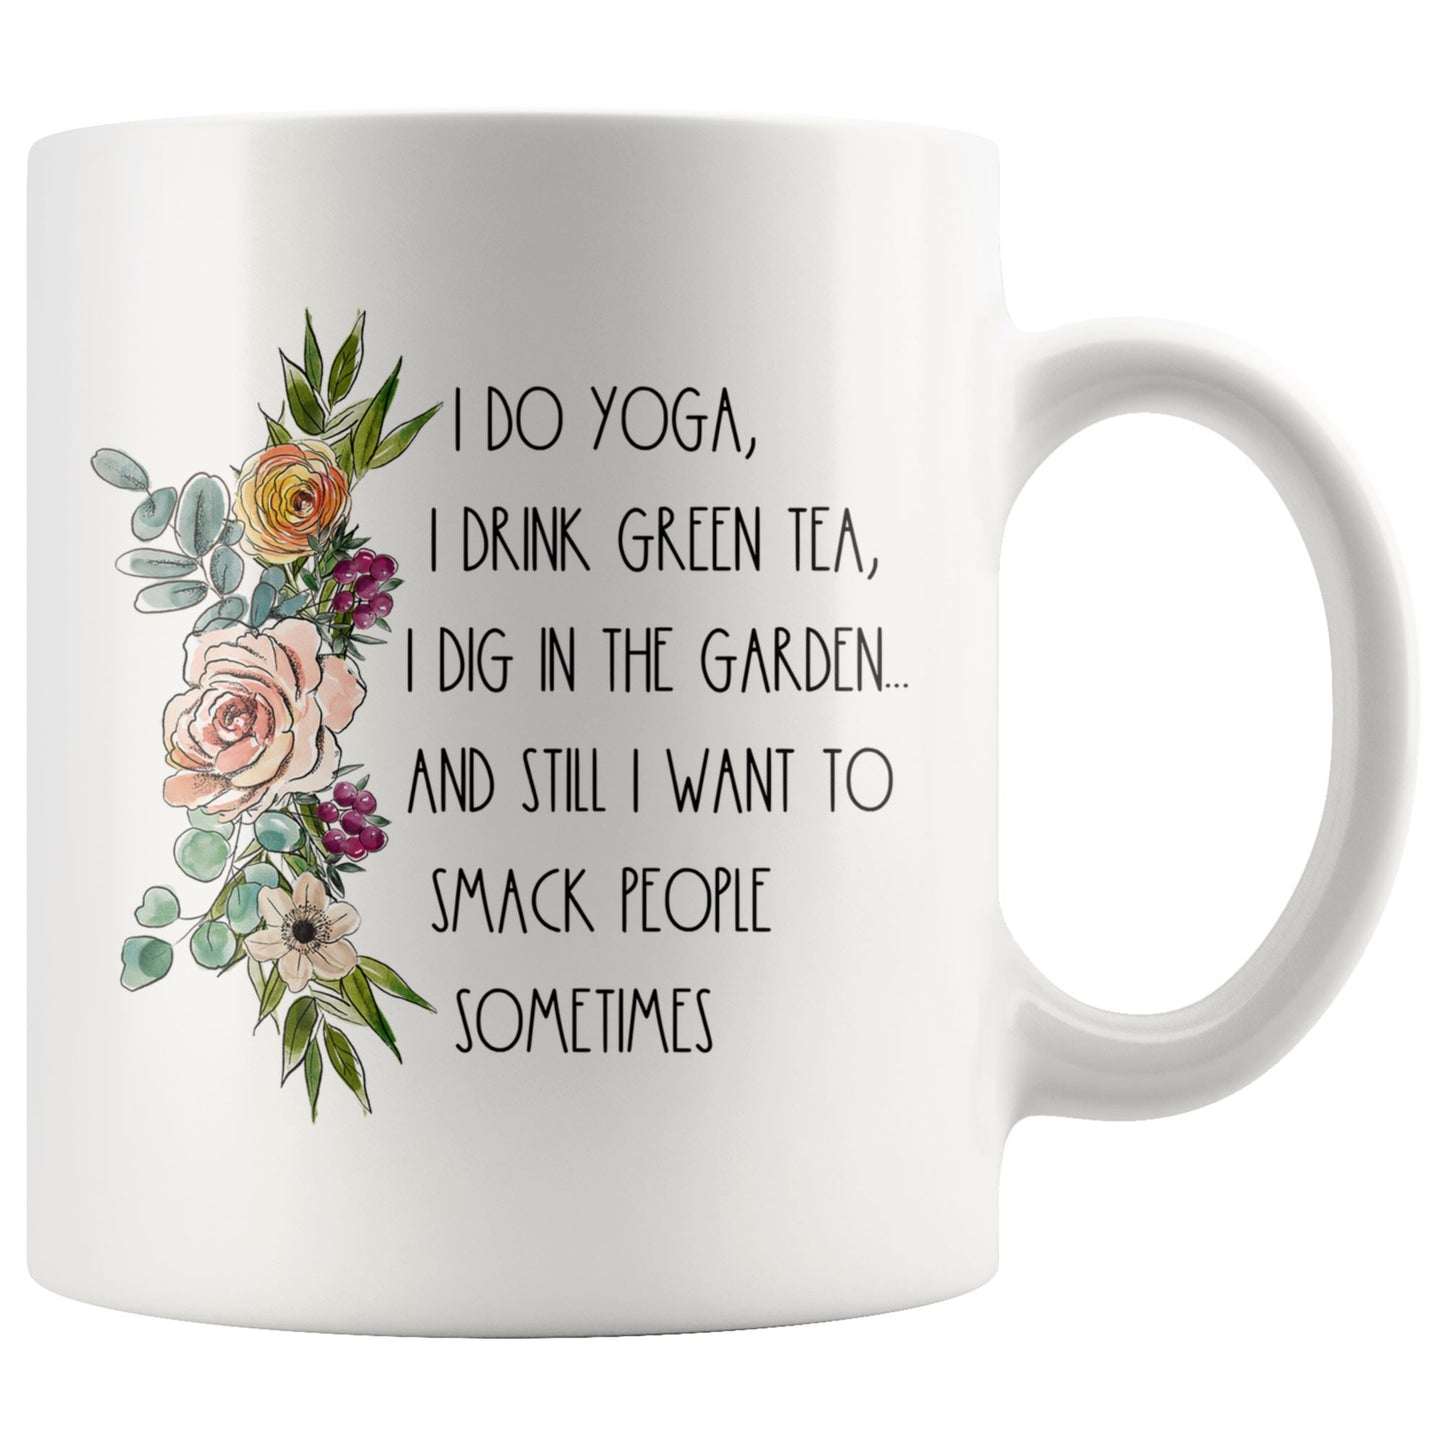 I Do Yoga, Drink Green Tea, Dig In The Garden and Still I Want To Smack People Sometimes Drinkware teelaunch 11oz Mug 